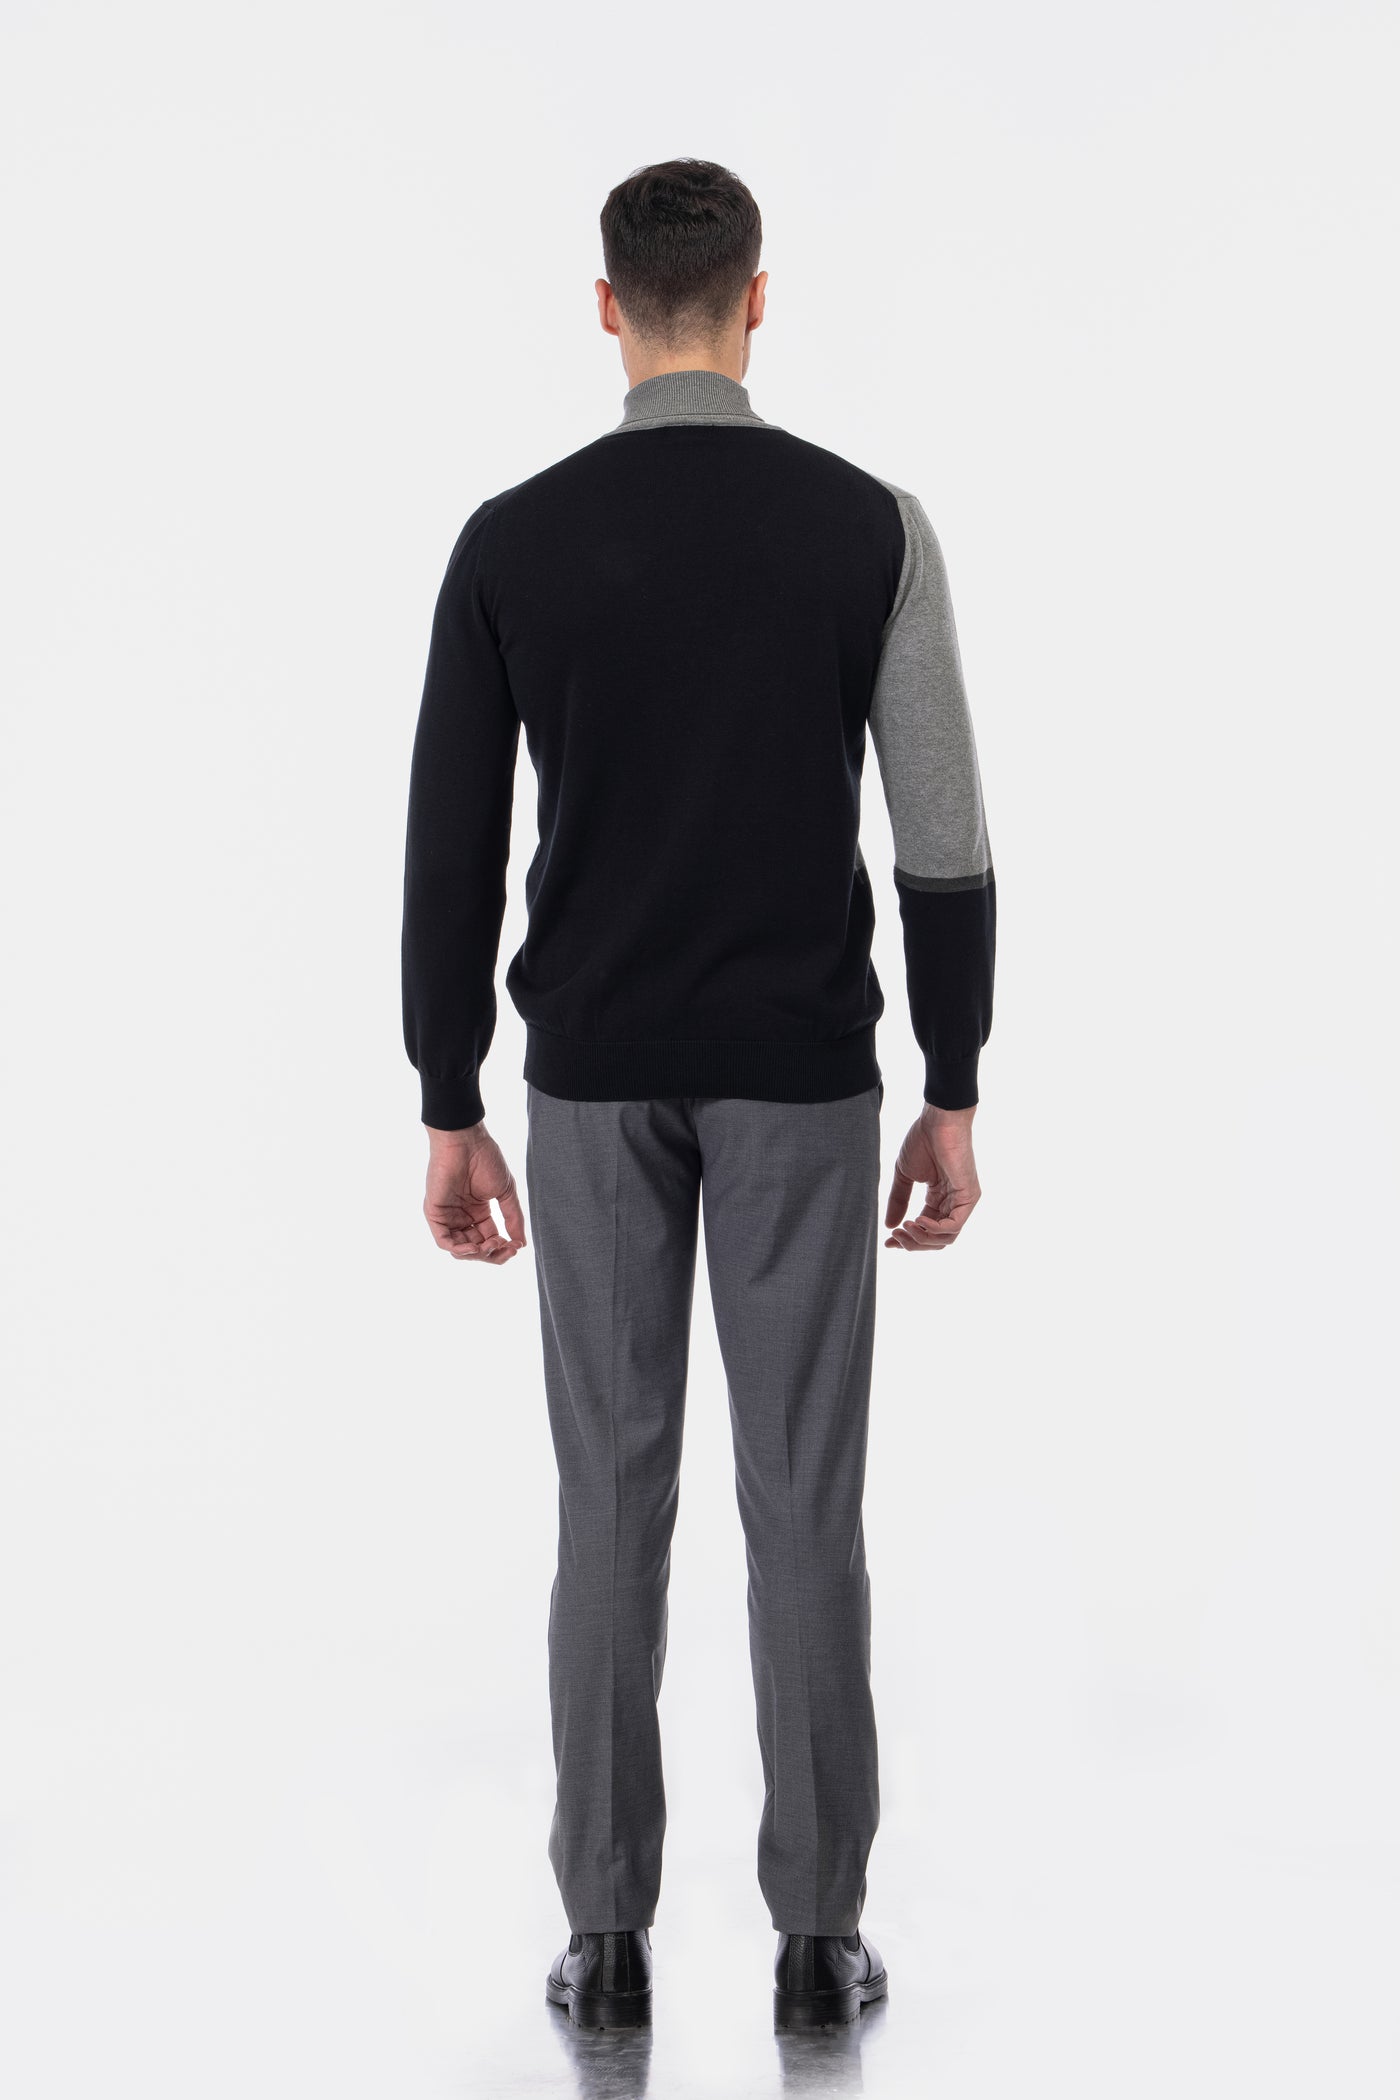 Jacquard Knitted High-neck Black & Gray Pullover